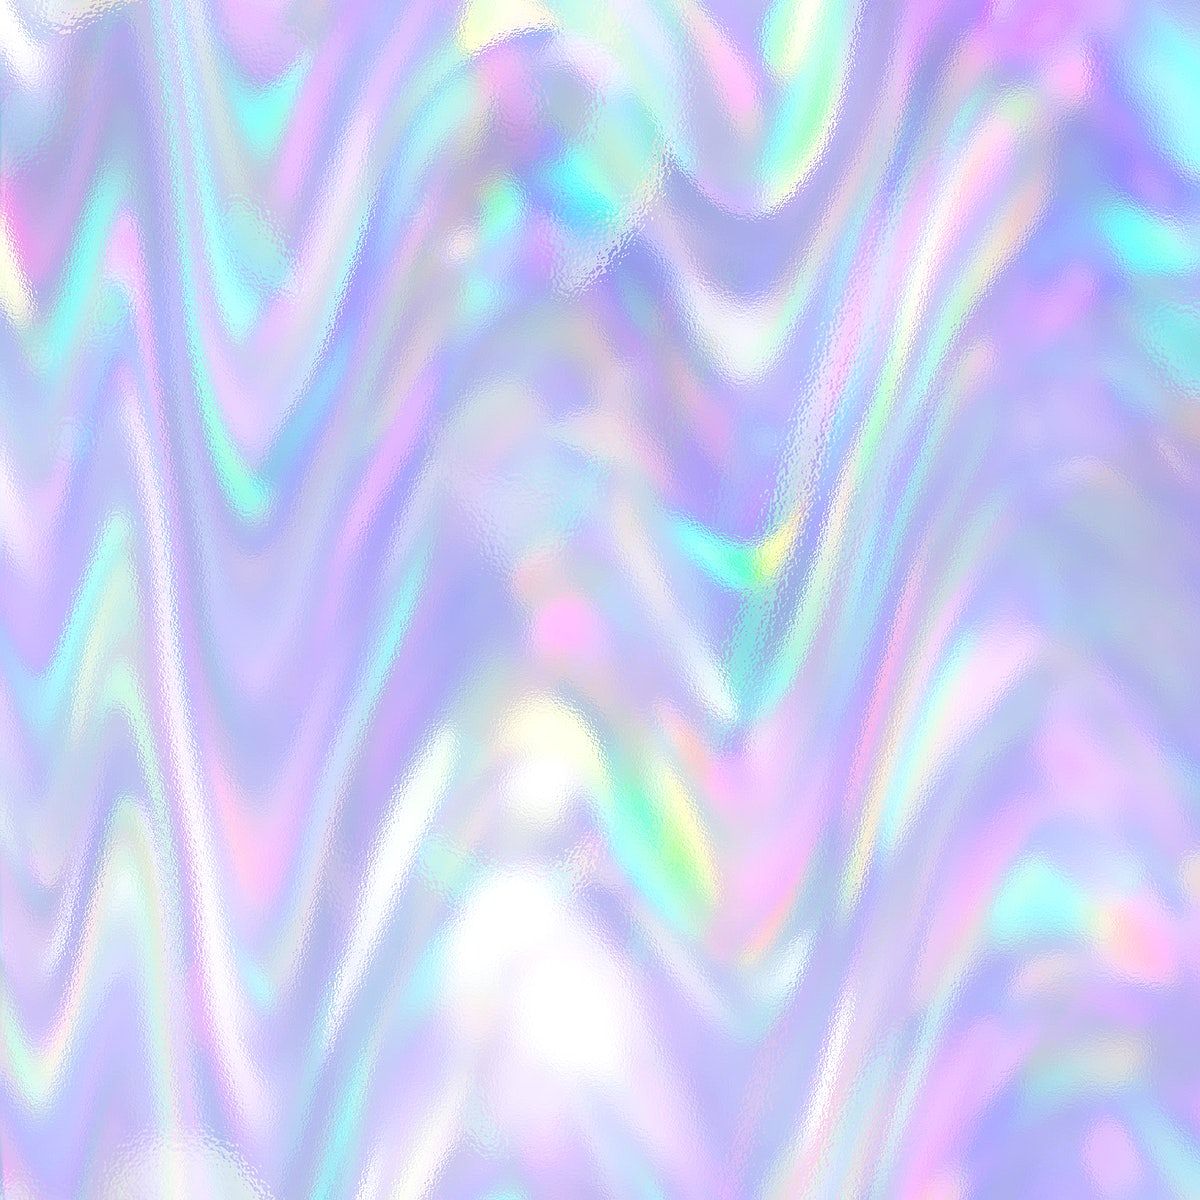 Shiny Holographic Background Design Image By Rawpixel